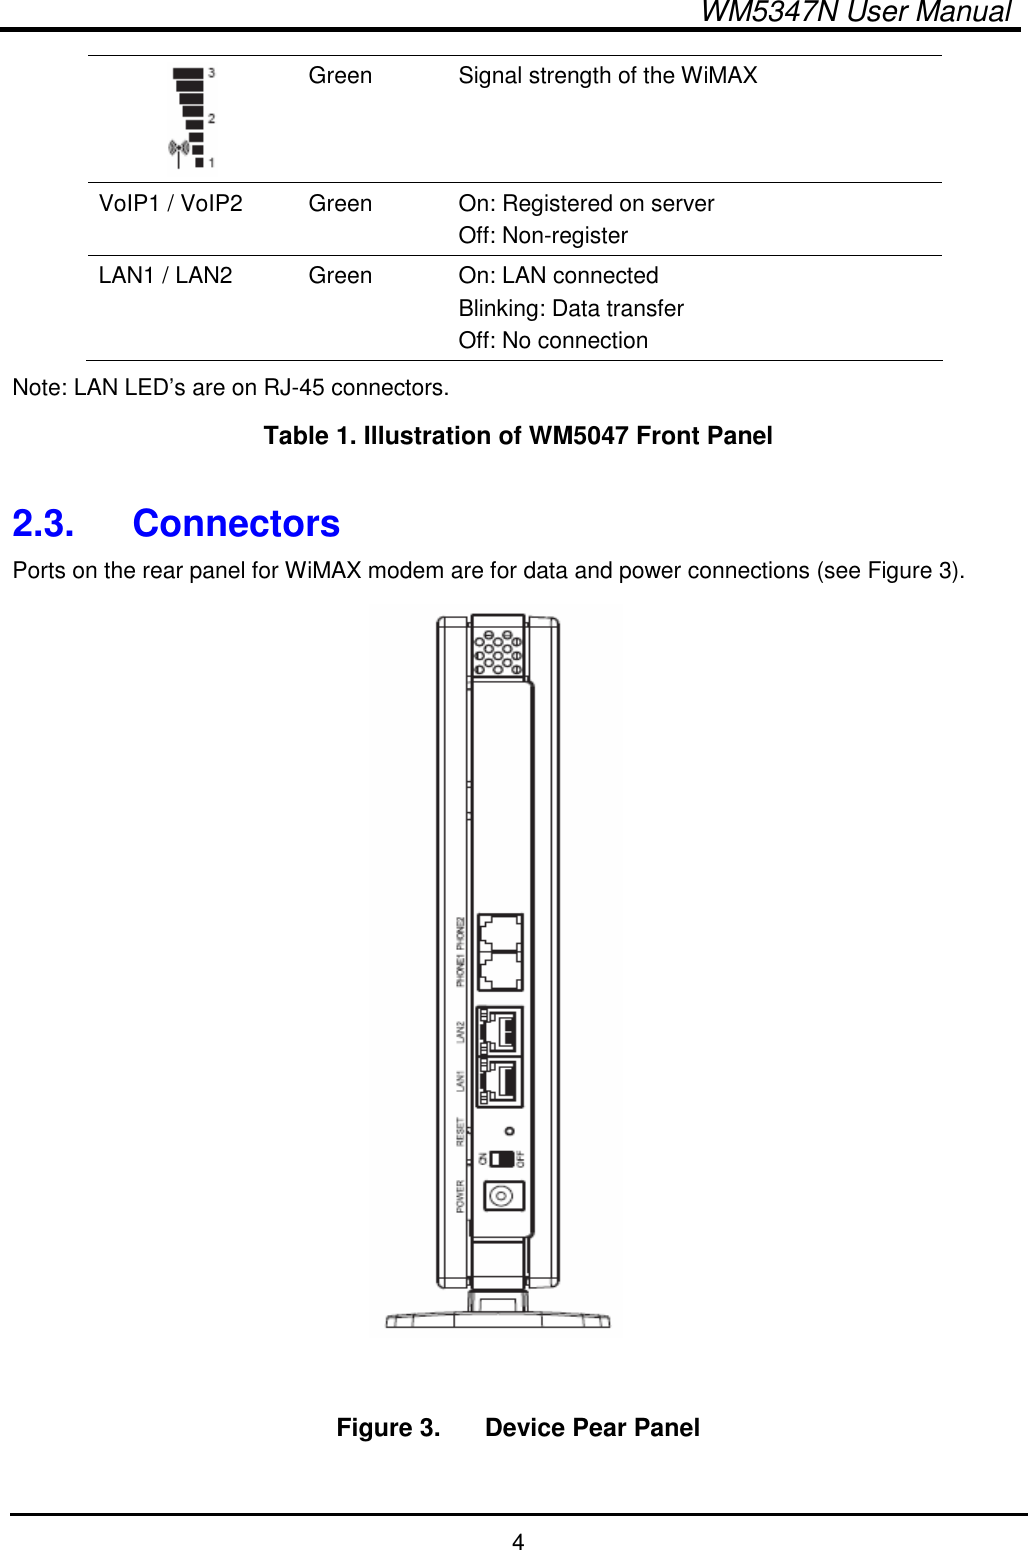  WM5347N User Manual  4  Green  Signal strength of the WiMAX VoIP1 / VoIP2  Green  On: Registered on server Off: Non-register   LAN1 / LAN2  Green  On: LAN connected Blinking: Data transfer Off: No connection Note: LAN LED’s are on RJ-45 connectors. Table 1. Illustration of WM5047 Front Panel  2.3.  Connectors Ports on the rear panel for WiMAX modem are for data and power connections (see Figure 3).   Figure 3.   Device Pear Panel  